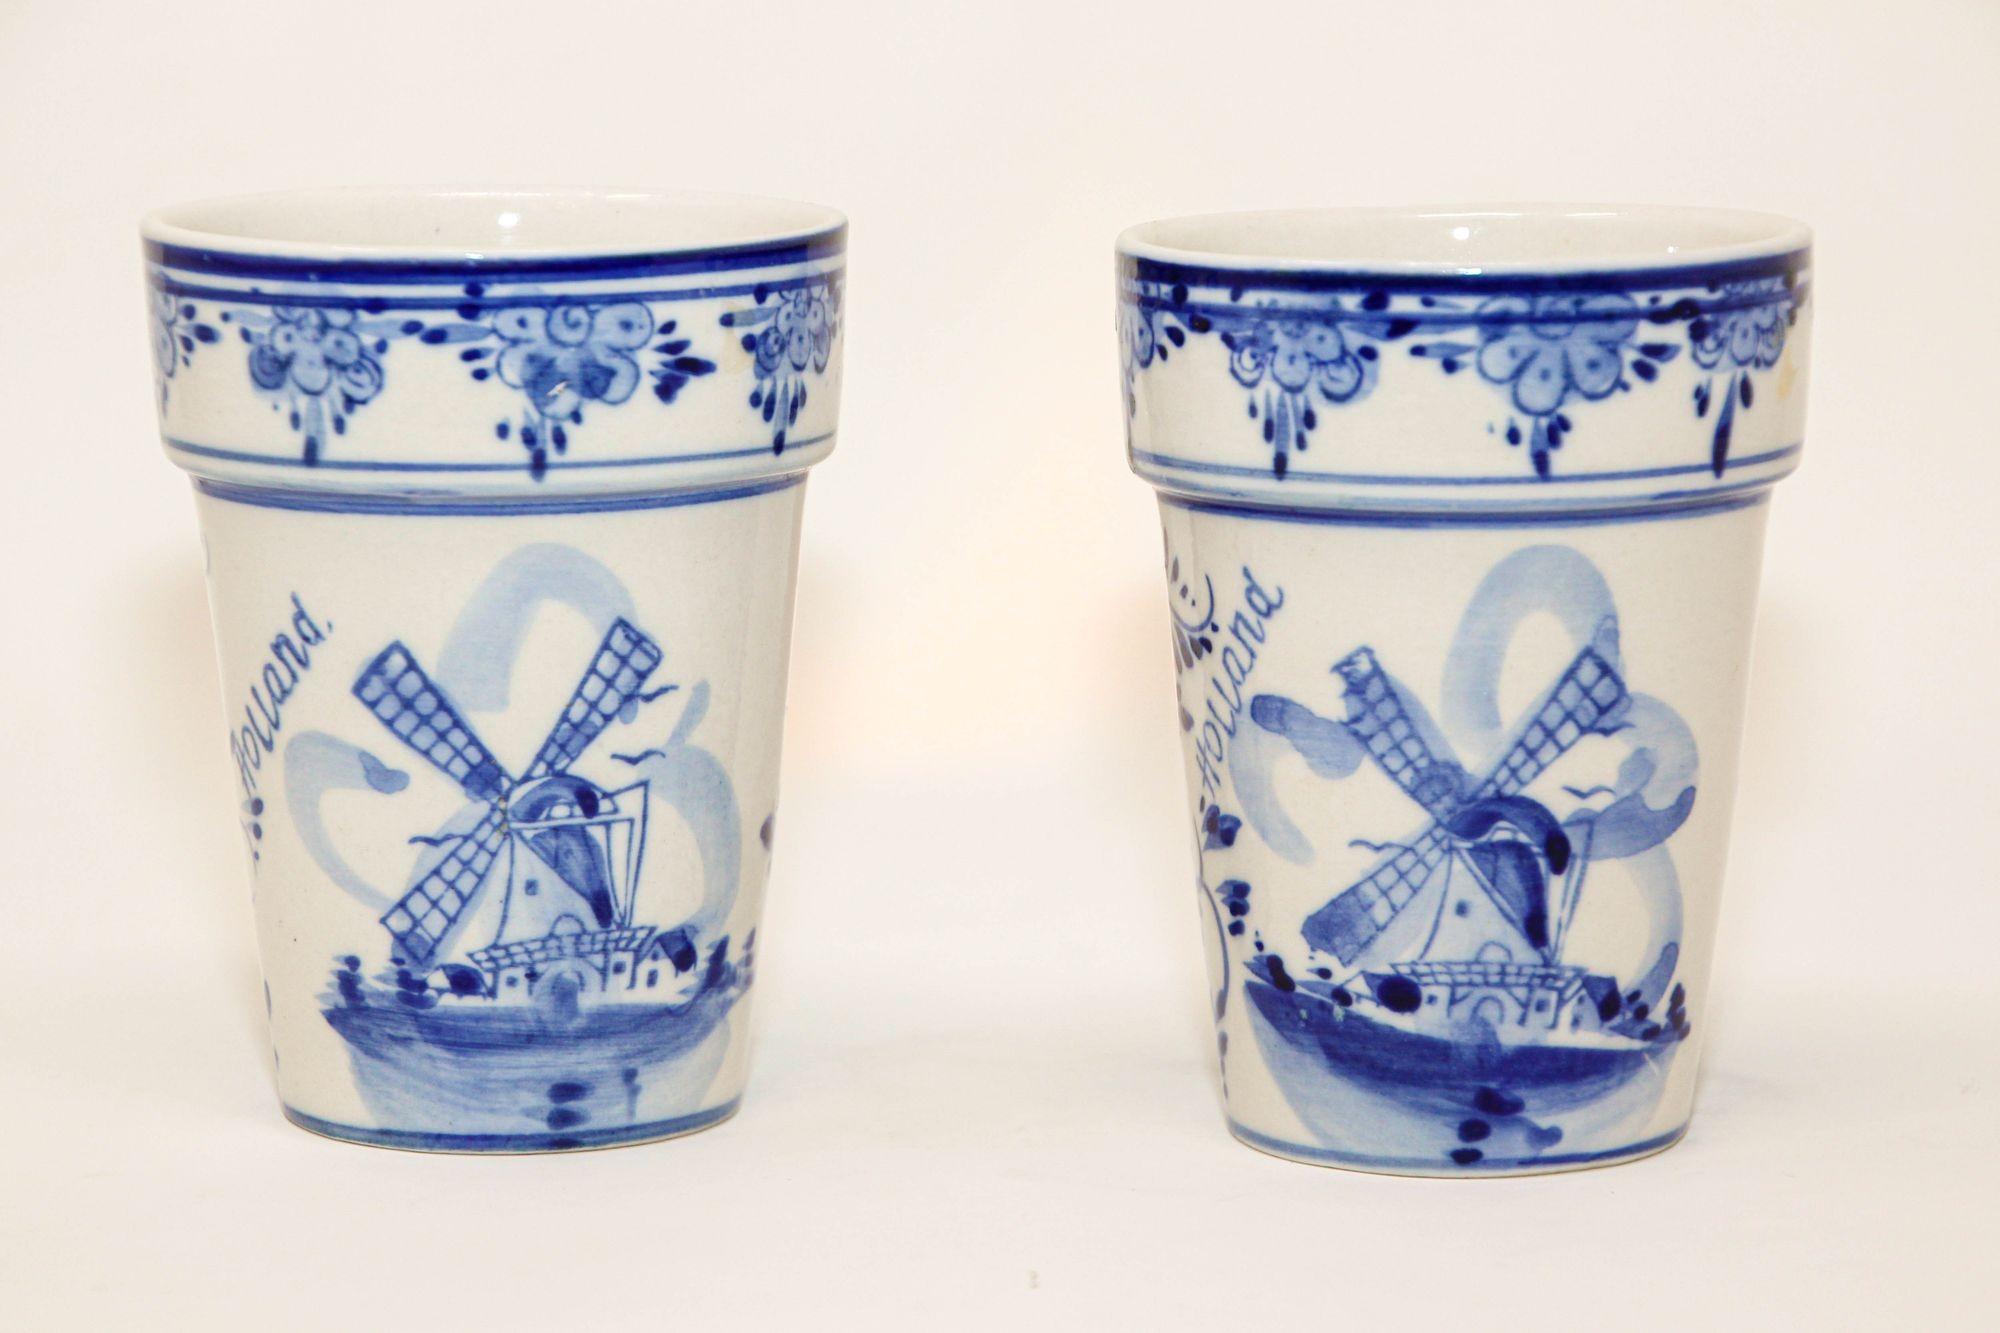 Hand painted vintage flower pot Delft plant pot from Holland.
Two vintage Delft blue and white ceramic flower small pots great to use with cactus or just as a decorative vases.
Hand painted ceramic pot is decorated with a windmill and beautiful,